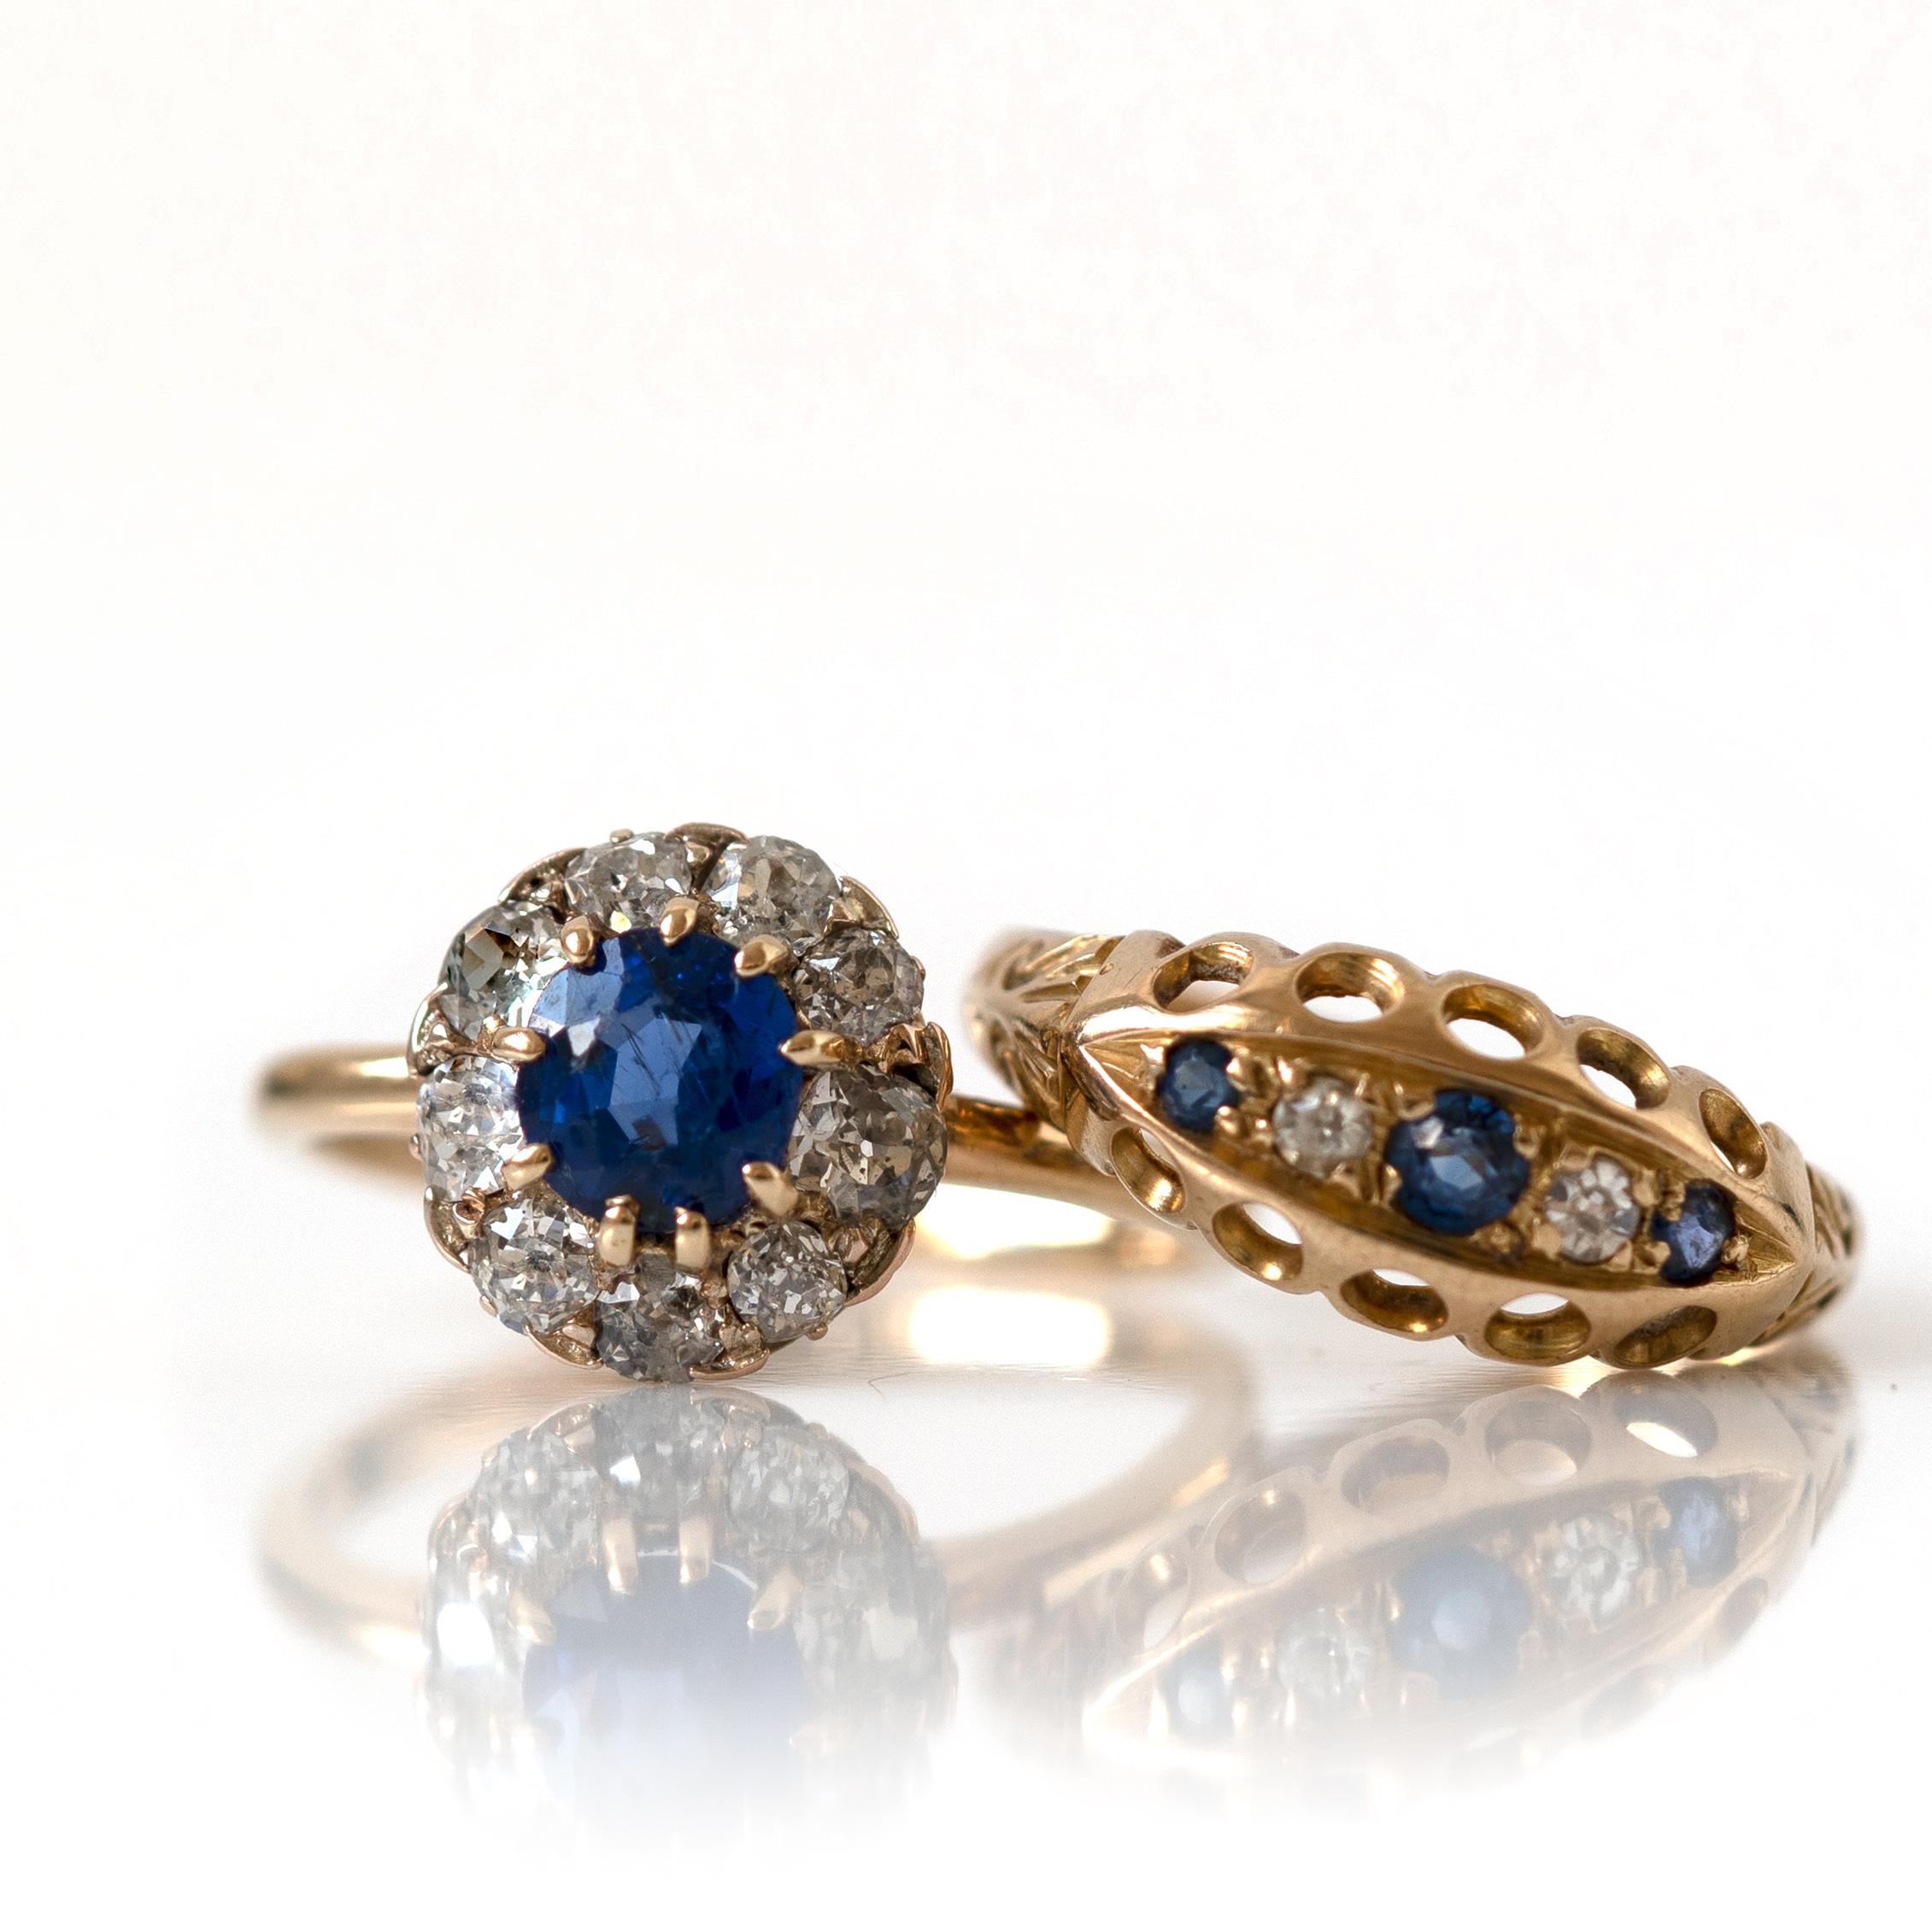 Antique 1914 18ct gold ring featuring three bright blue sapphires and two bright white diamonds set in a cut out lace setting. This piece was hallmarked in Birmingham in 1914.

HALLMARKS
18, Anchor, Letter - P

MEASUREMENTS
Length - 0.14cm /